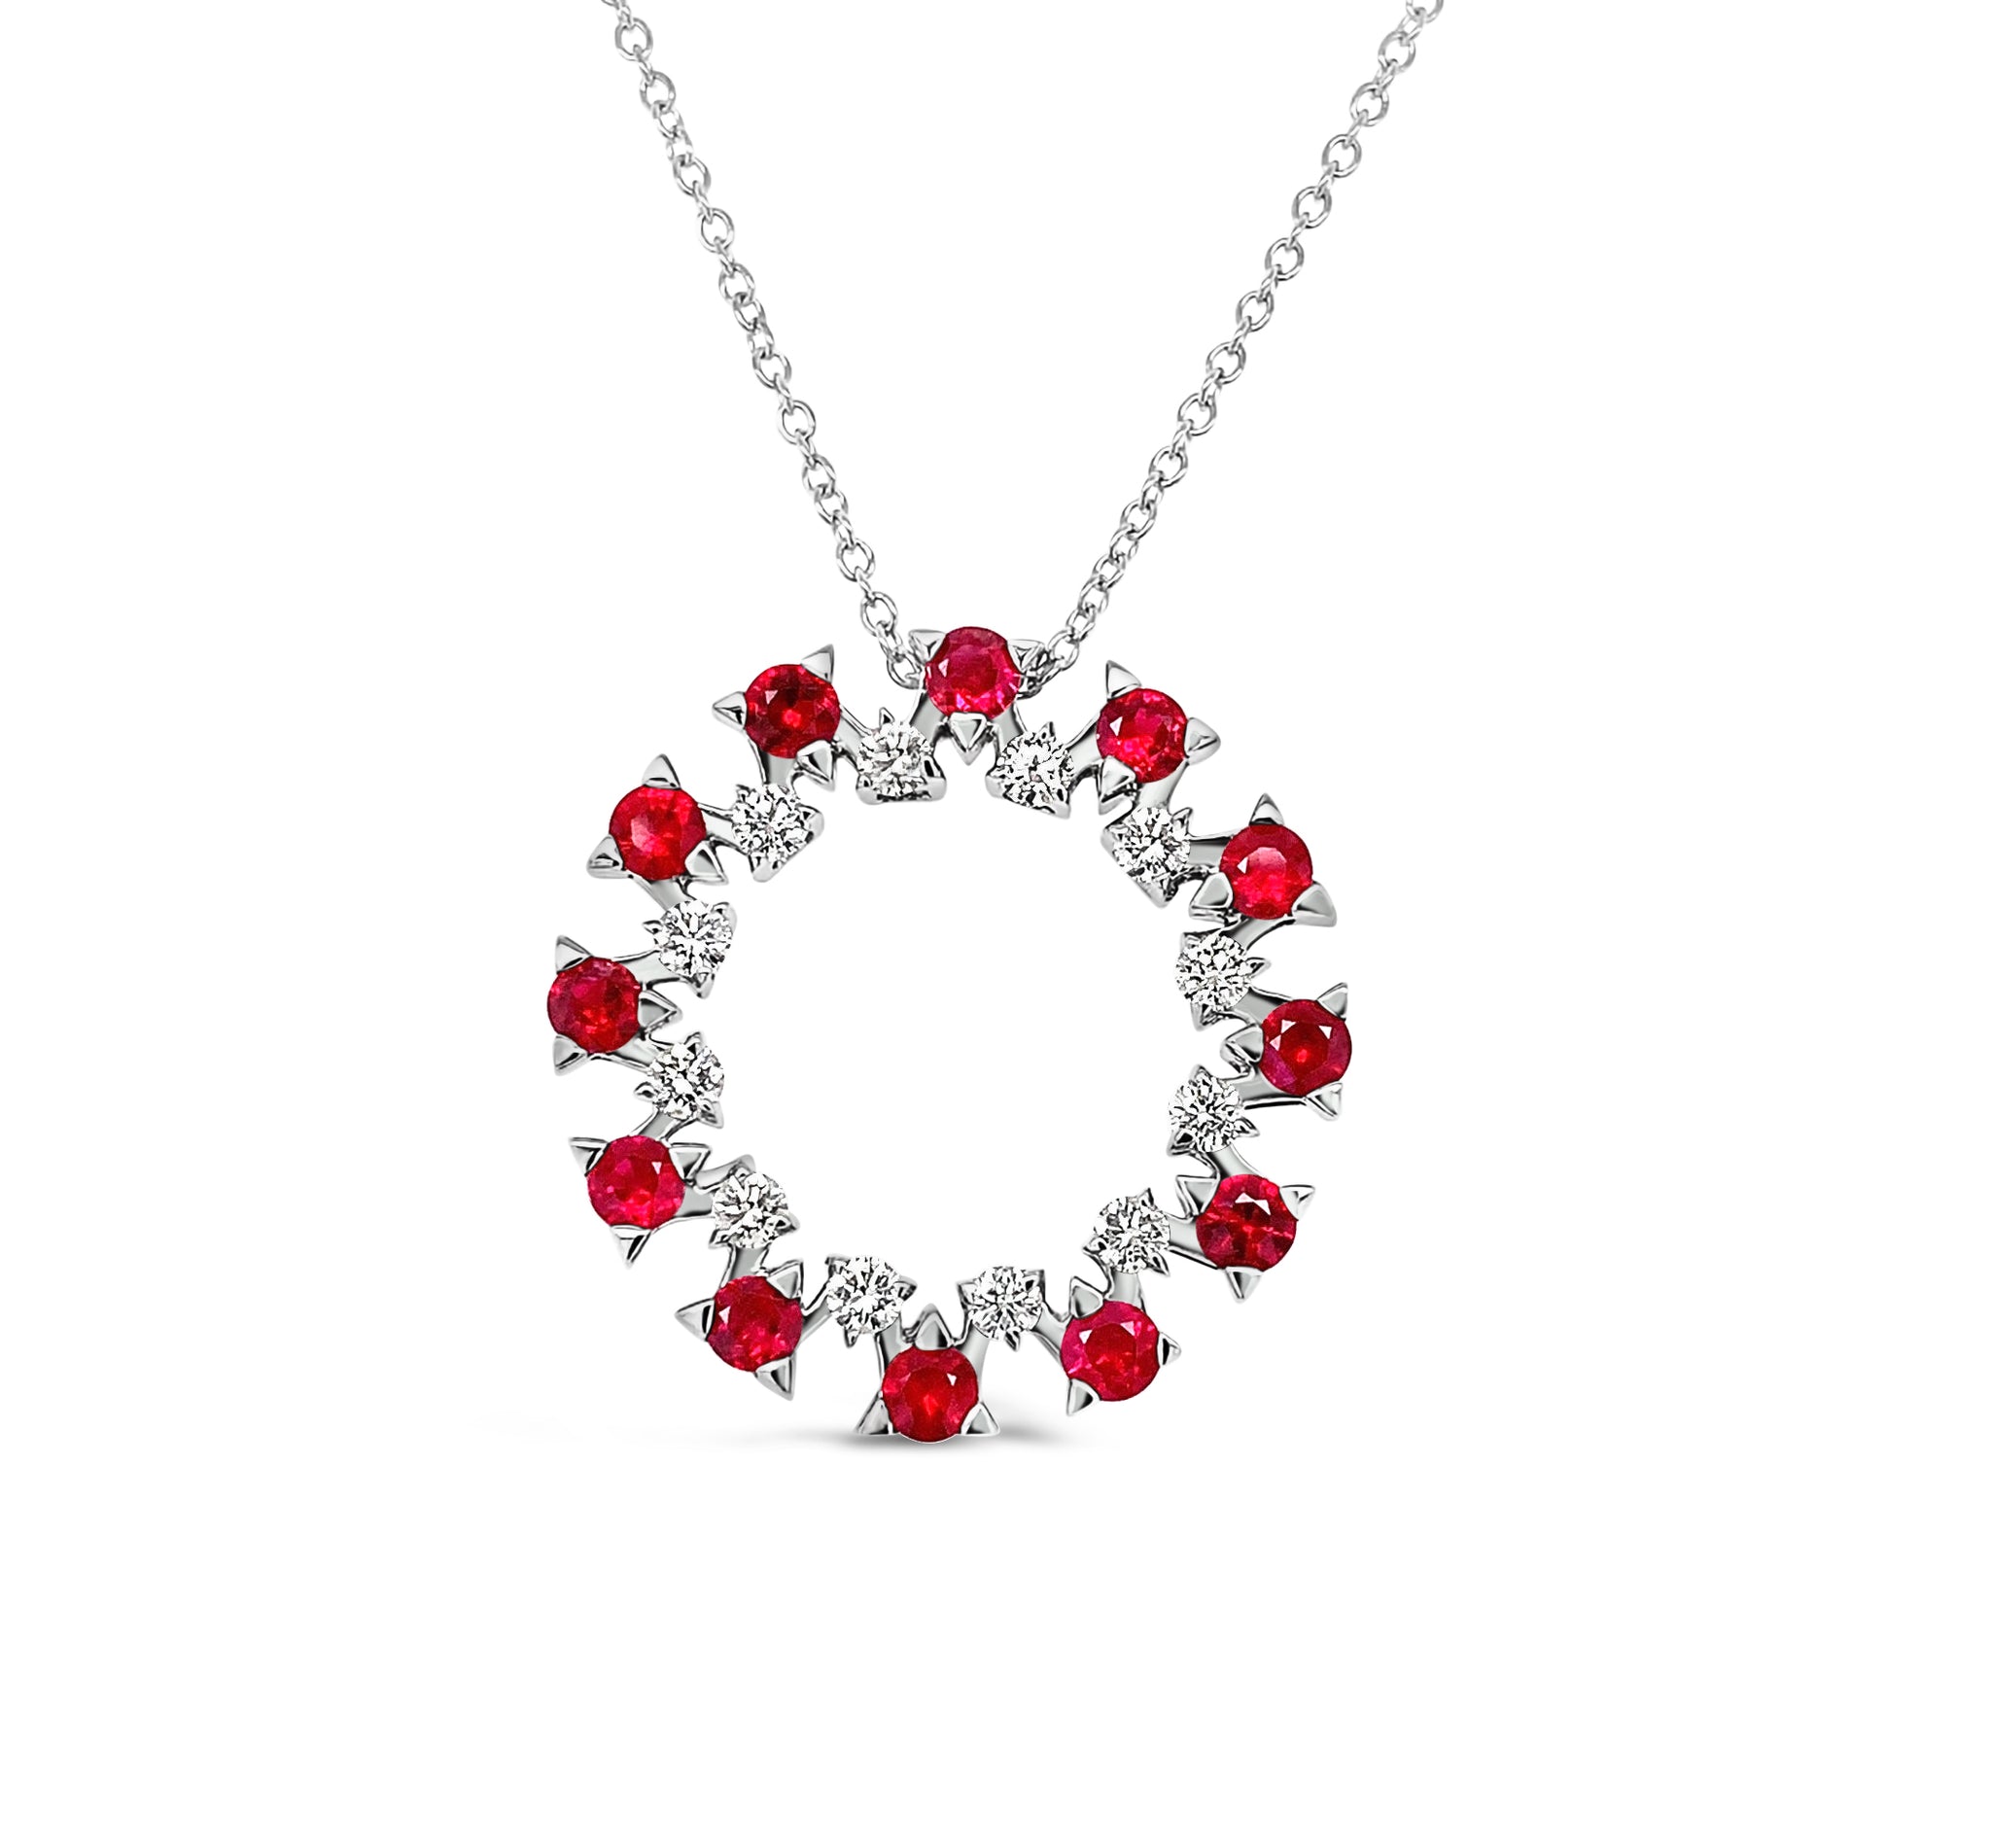 Coil Collection White Diamonds and Rubies Necklace